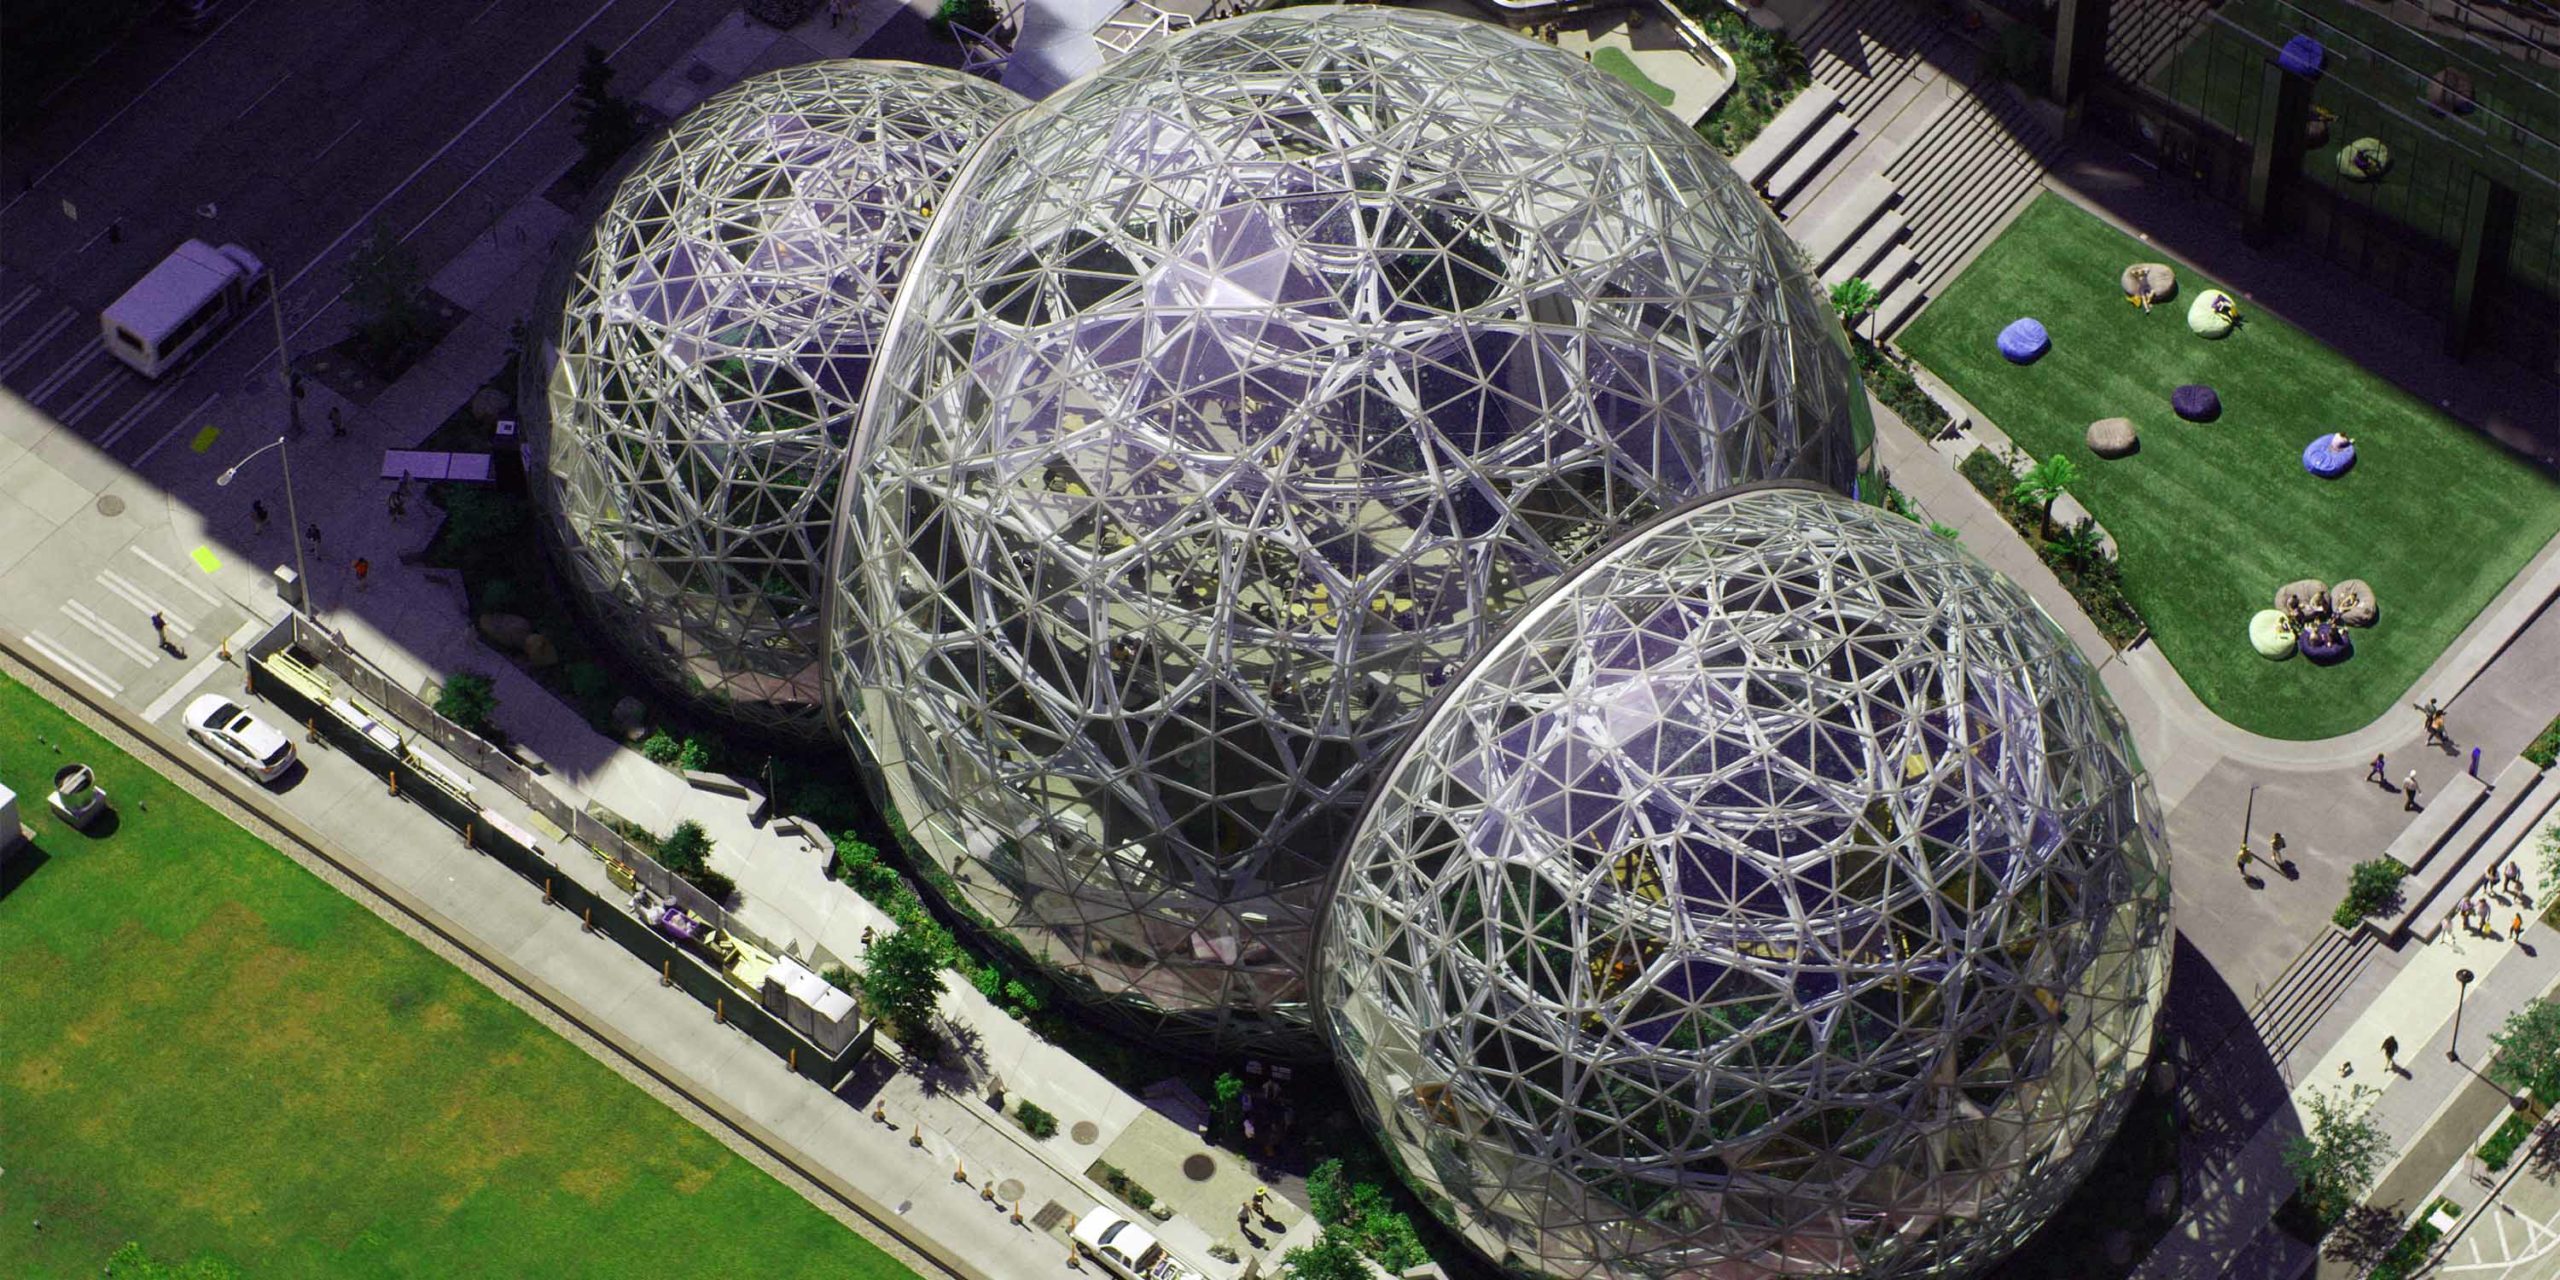 The Spheres at Amazon header image #6